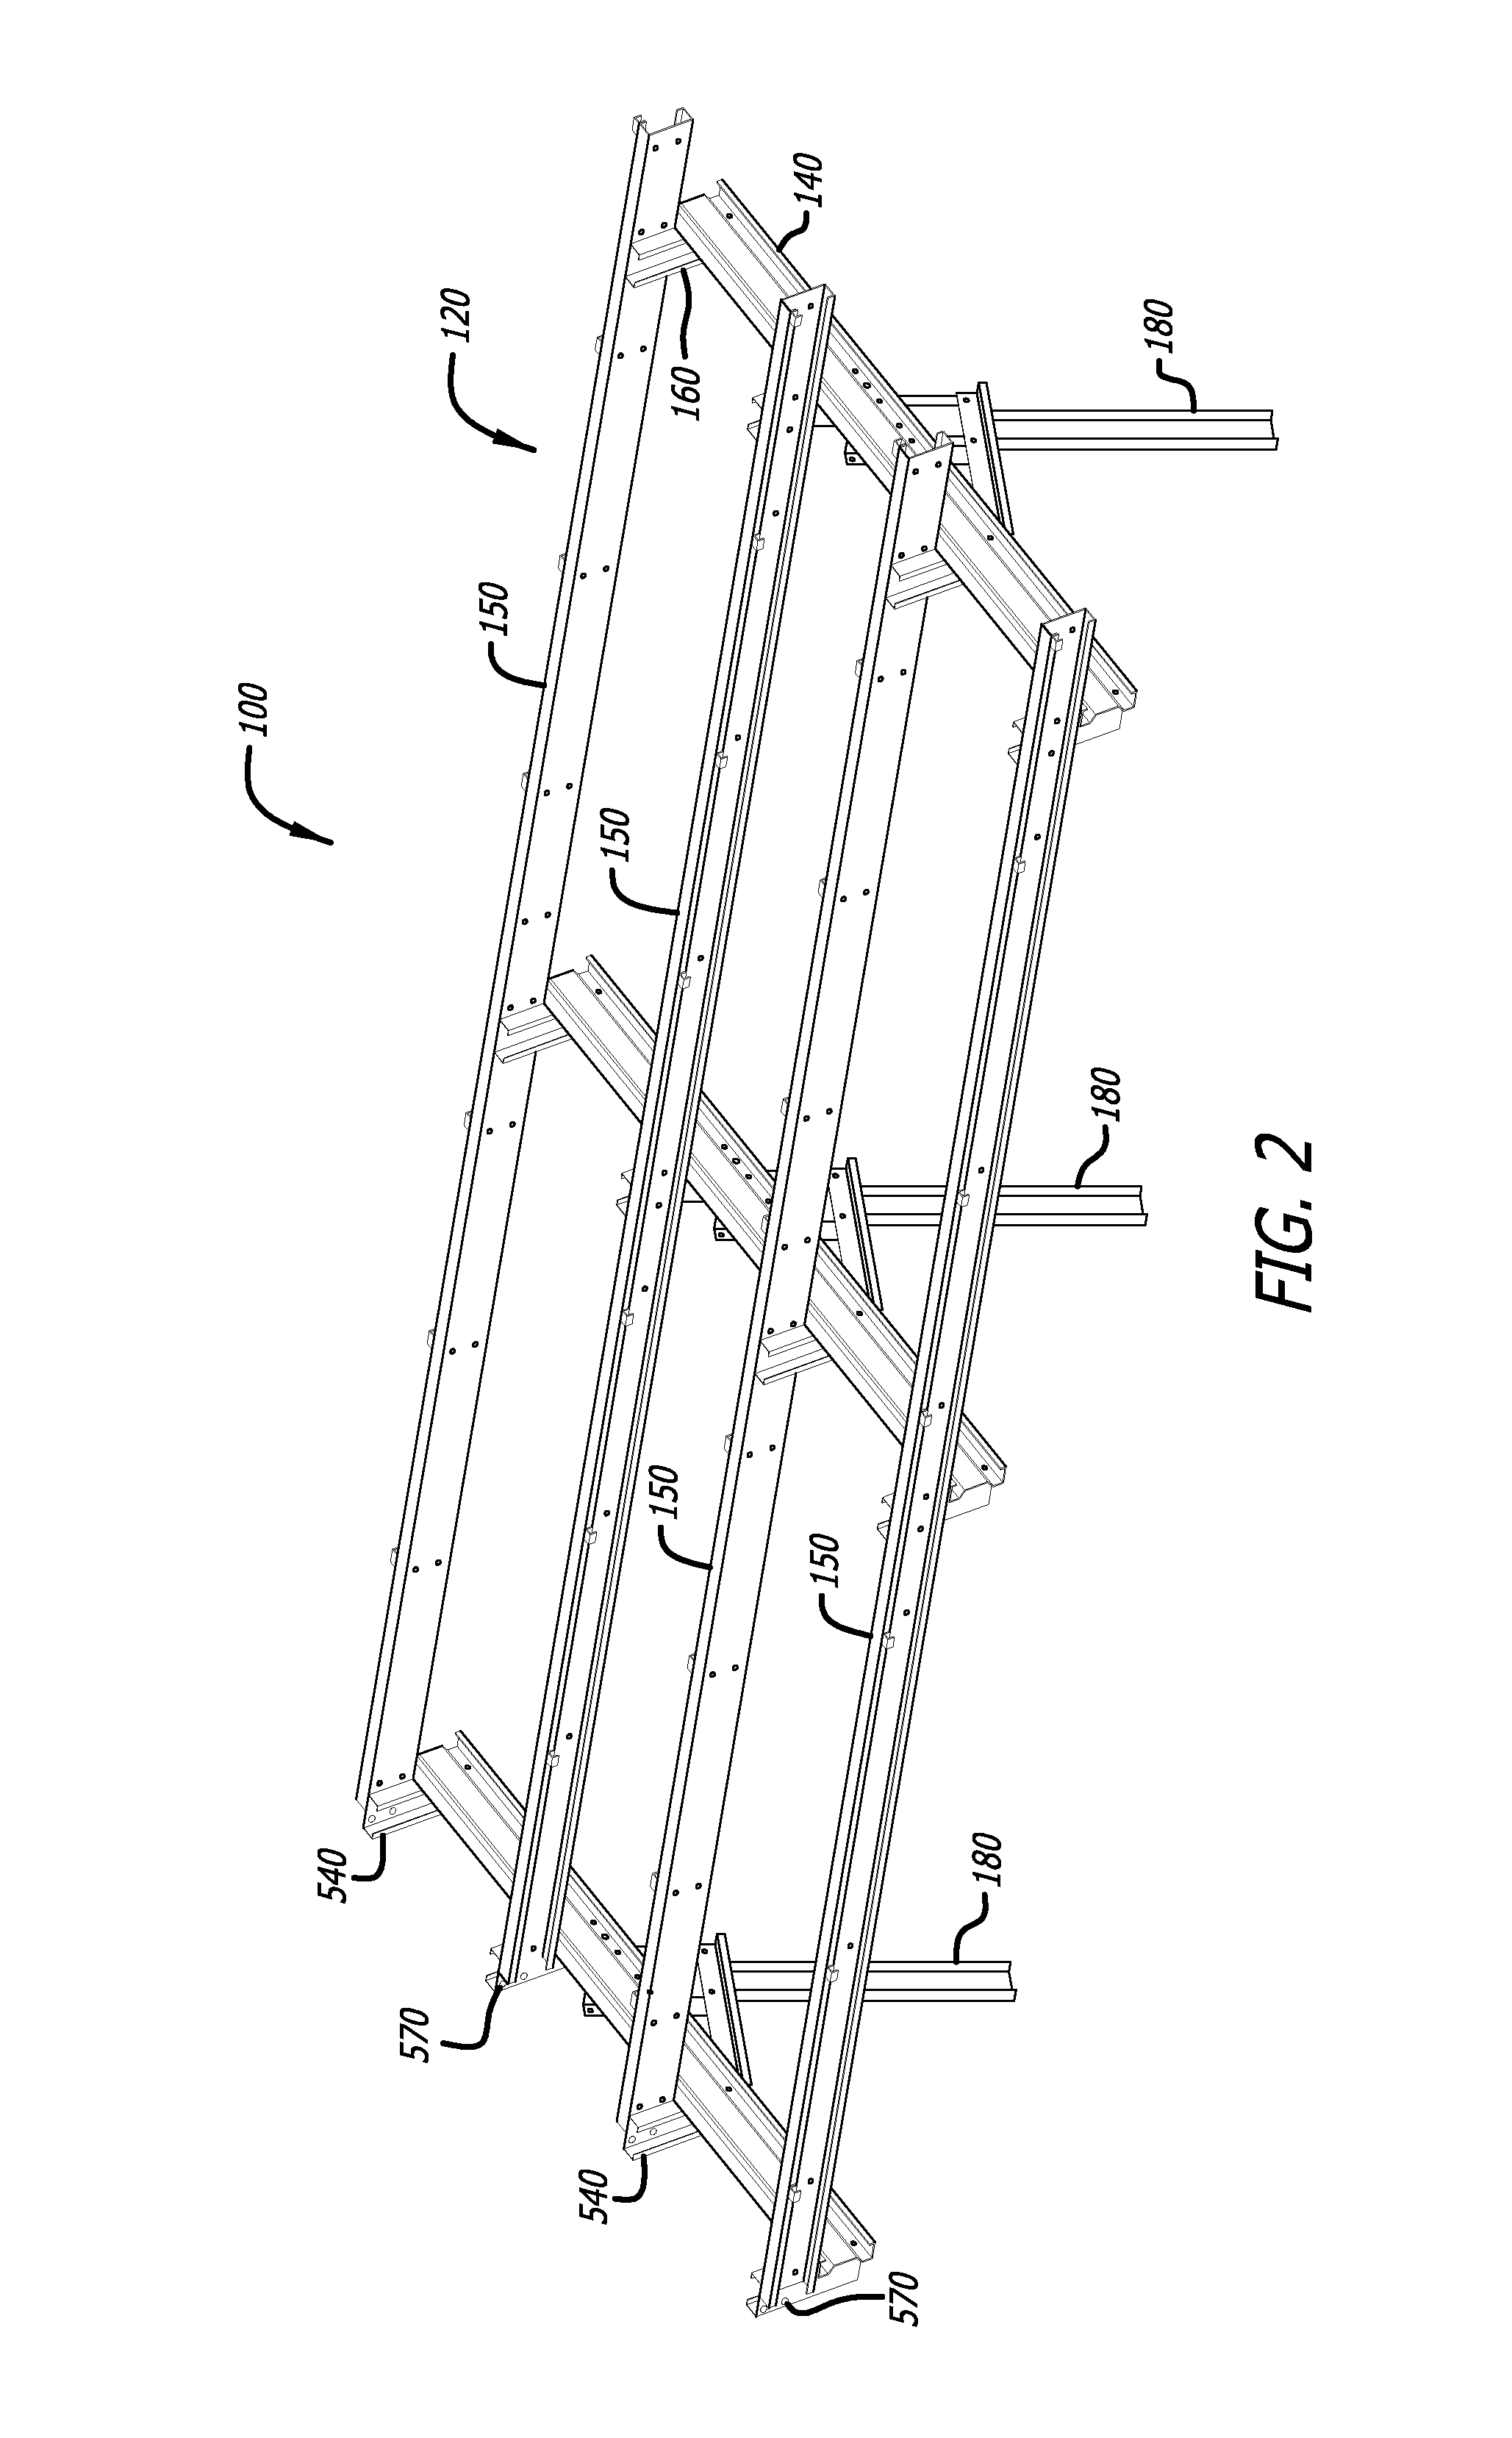 Photovoltaic Mounting Apparatus and Method of Installation